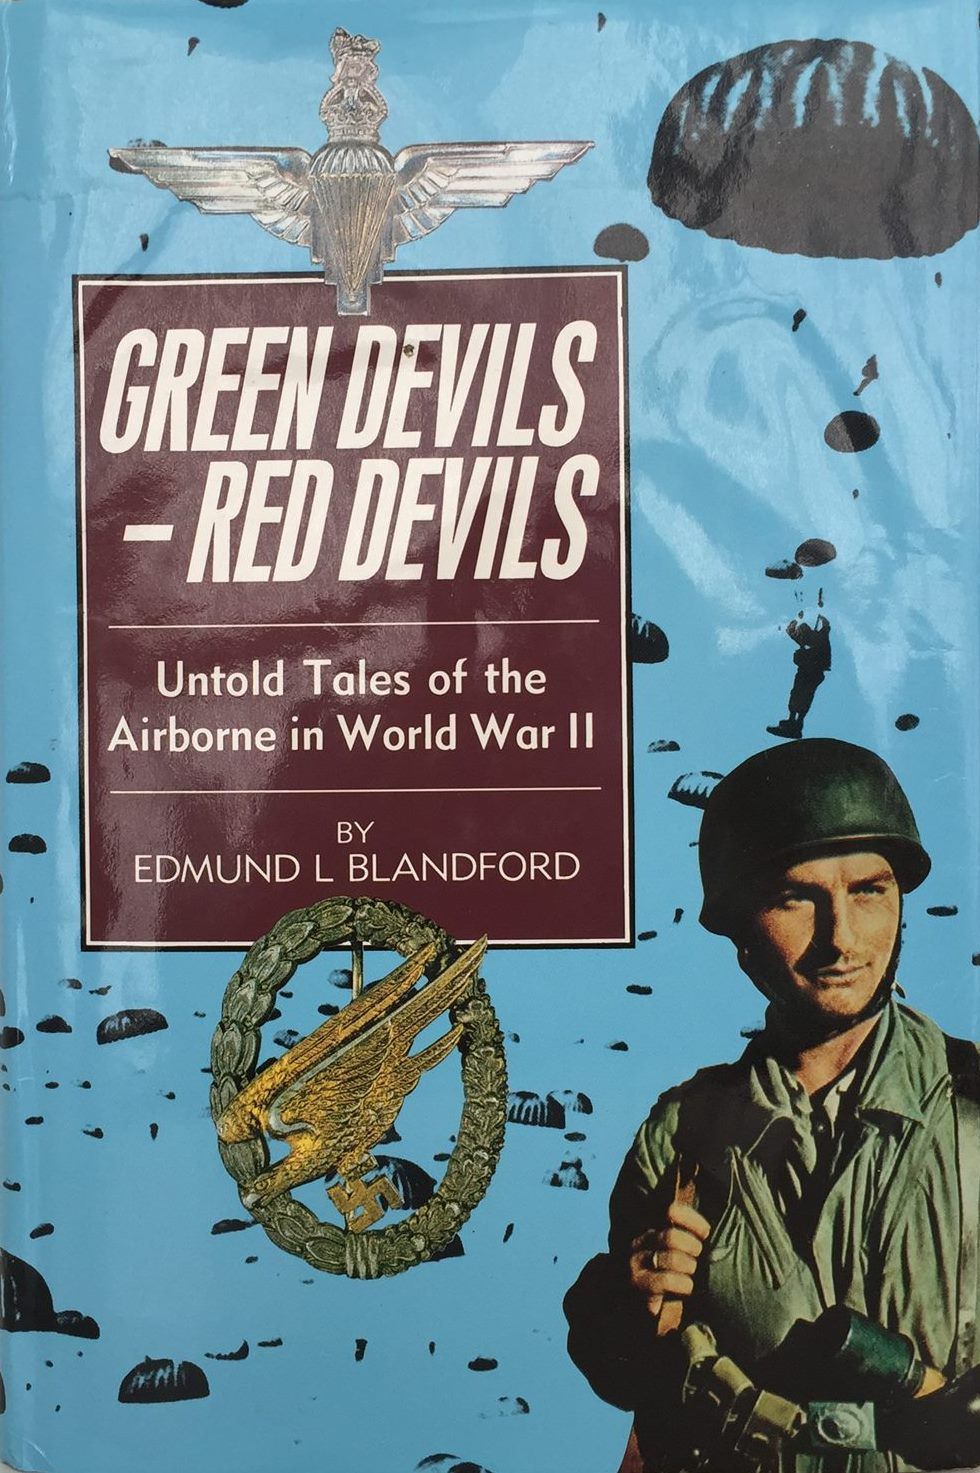 GREEN DEVILS, RED DEVILS: Untold Tales of the Airborne in World War II